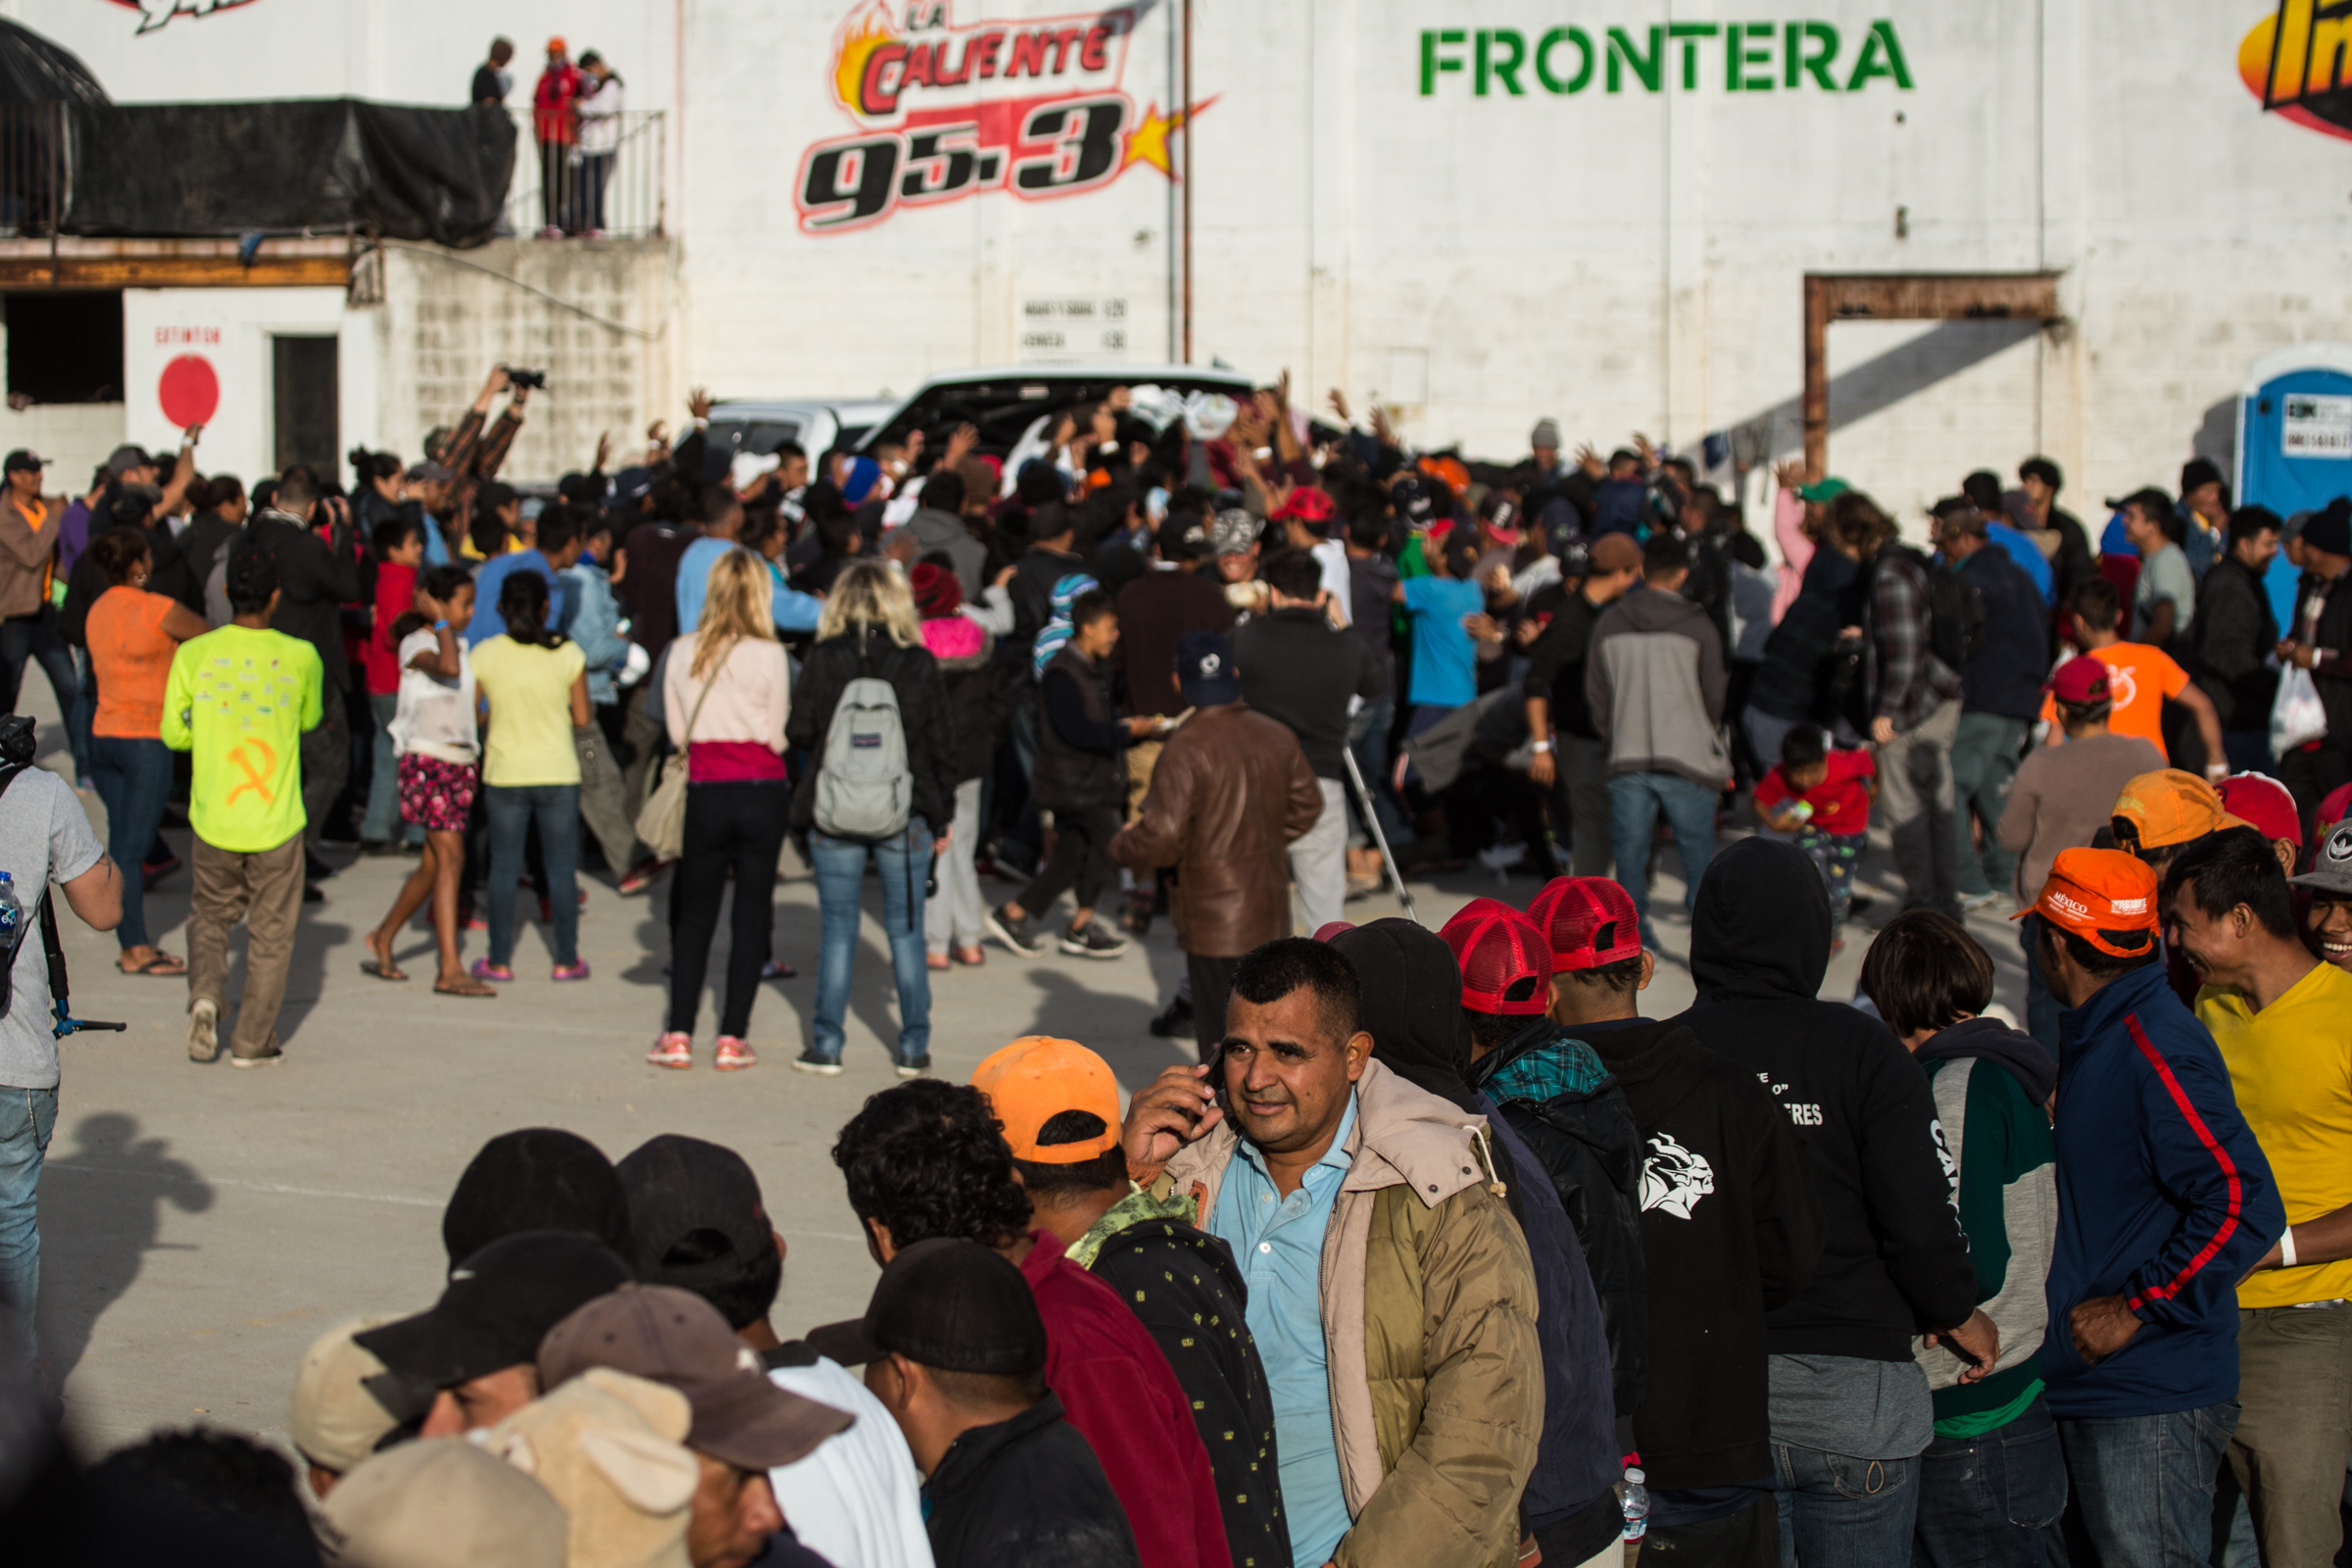   Displaced Hondurans wait in line to receive hot meals prepared by non-government aid groups at El Barretal in Tijuana, Mexico, Saturday, Dec. 1, 2018. In the background, others attempt to catch care packages containing clothing being thrown from a 